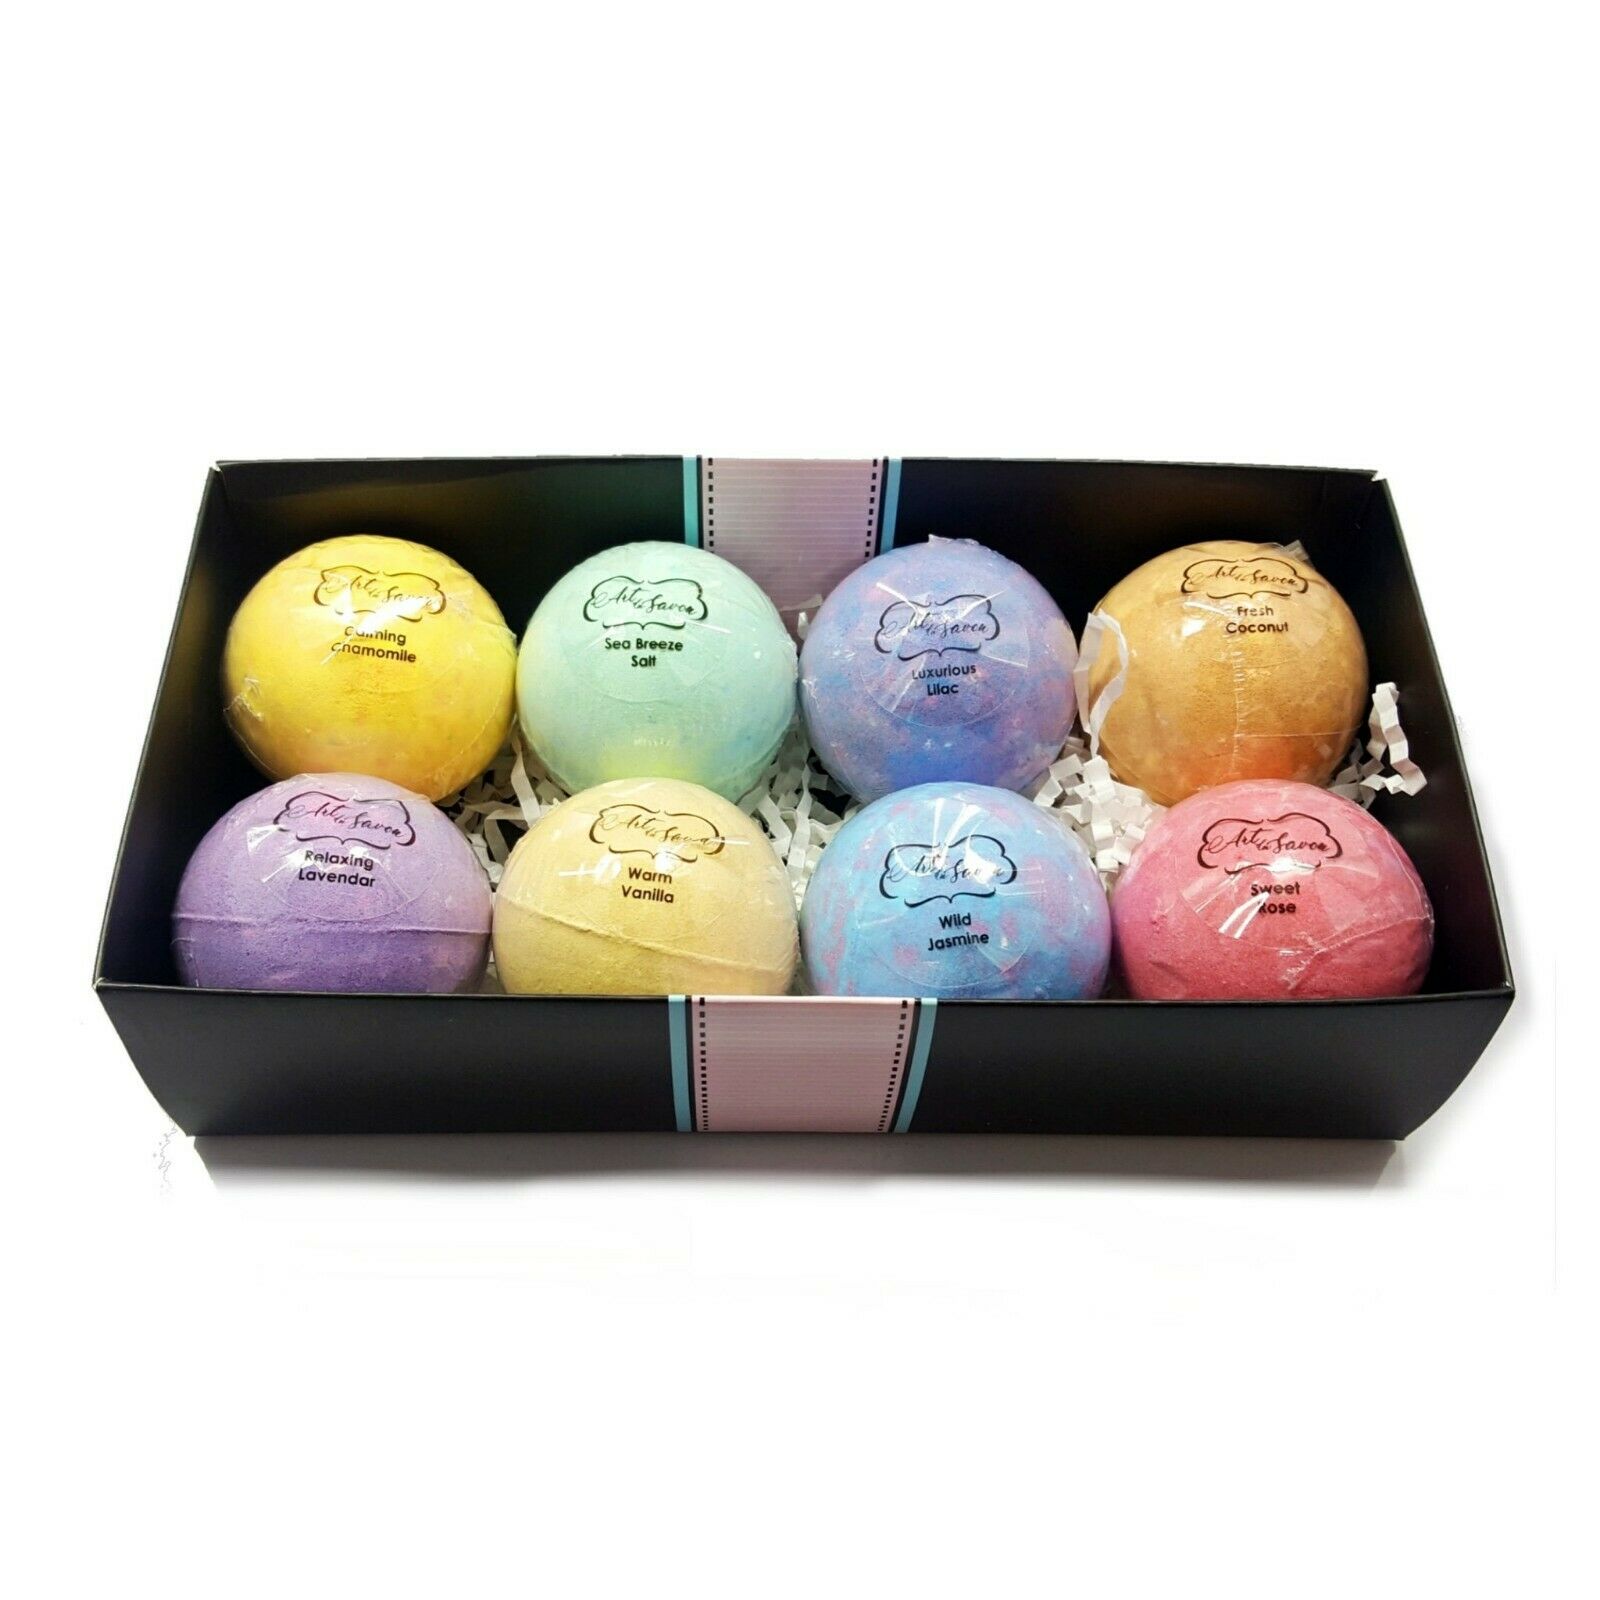 ISO Beauty Presents Art Du Savon 8pc Bath Bomb Luxury Gift Set Soothe Your Stressed Body and Mind While The Bath Bombs Releasing Bursts Of Uplifting Fragrance While Conditioning Skin With Shea Butter - image 2 of 2